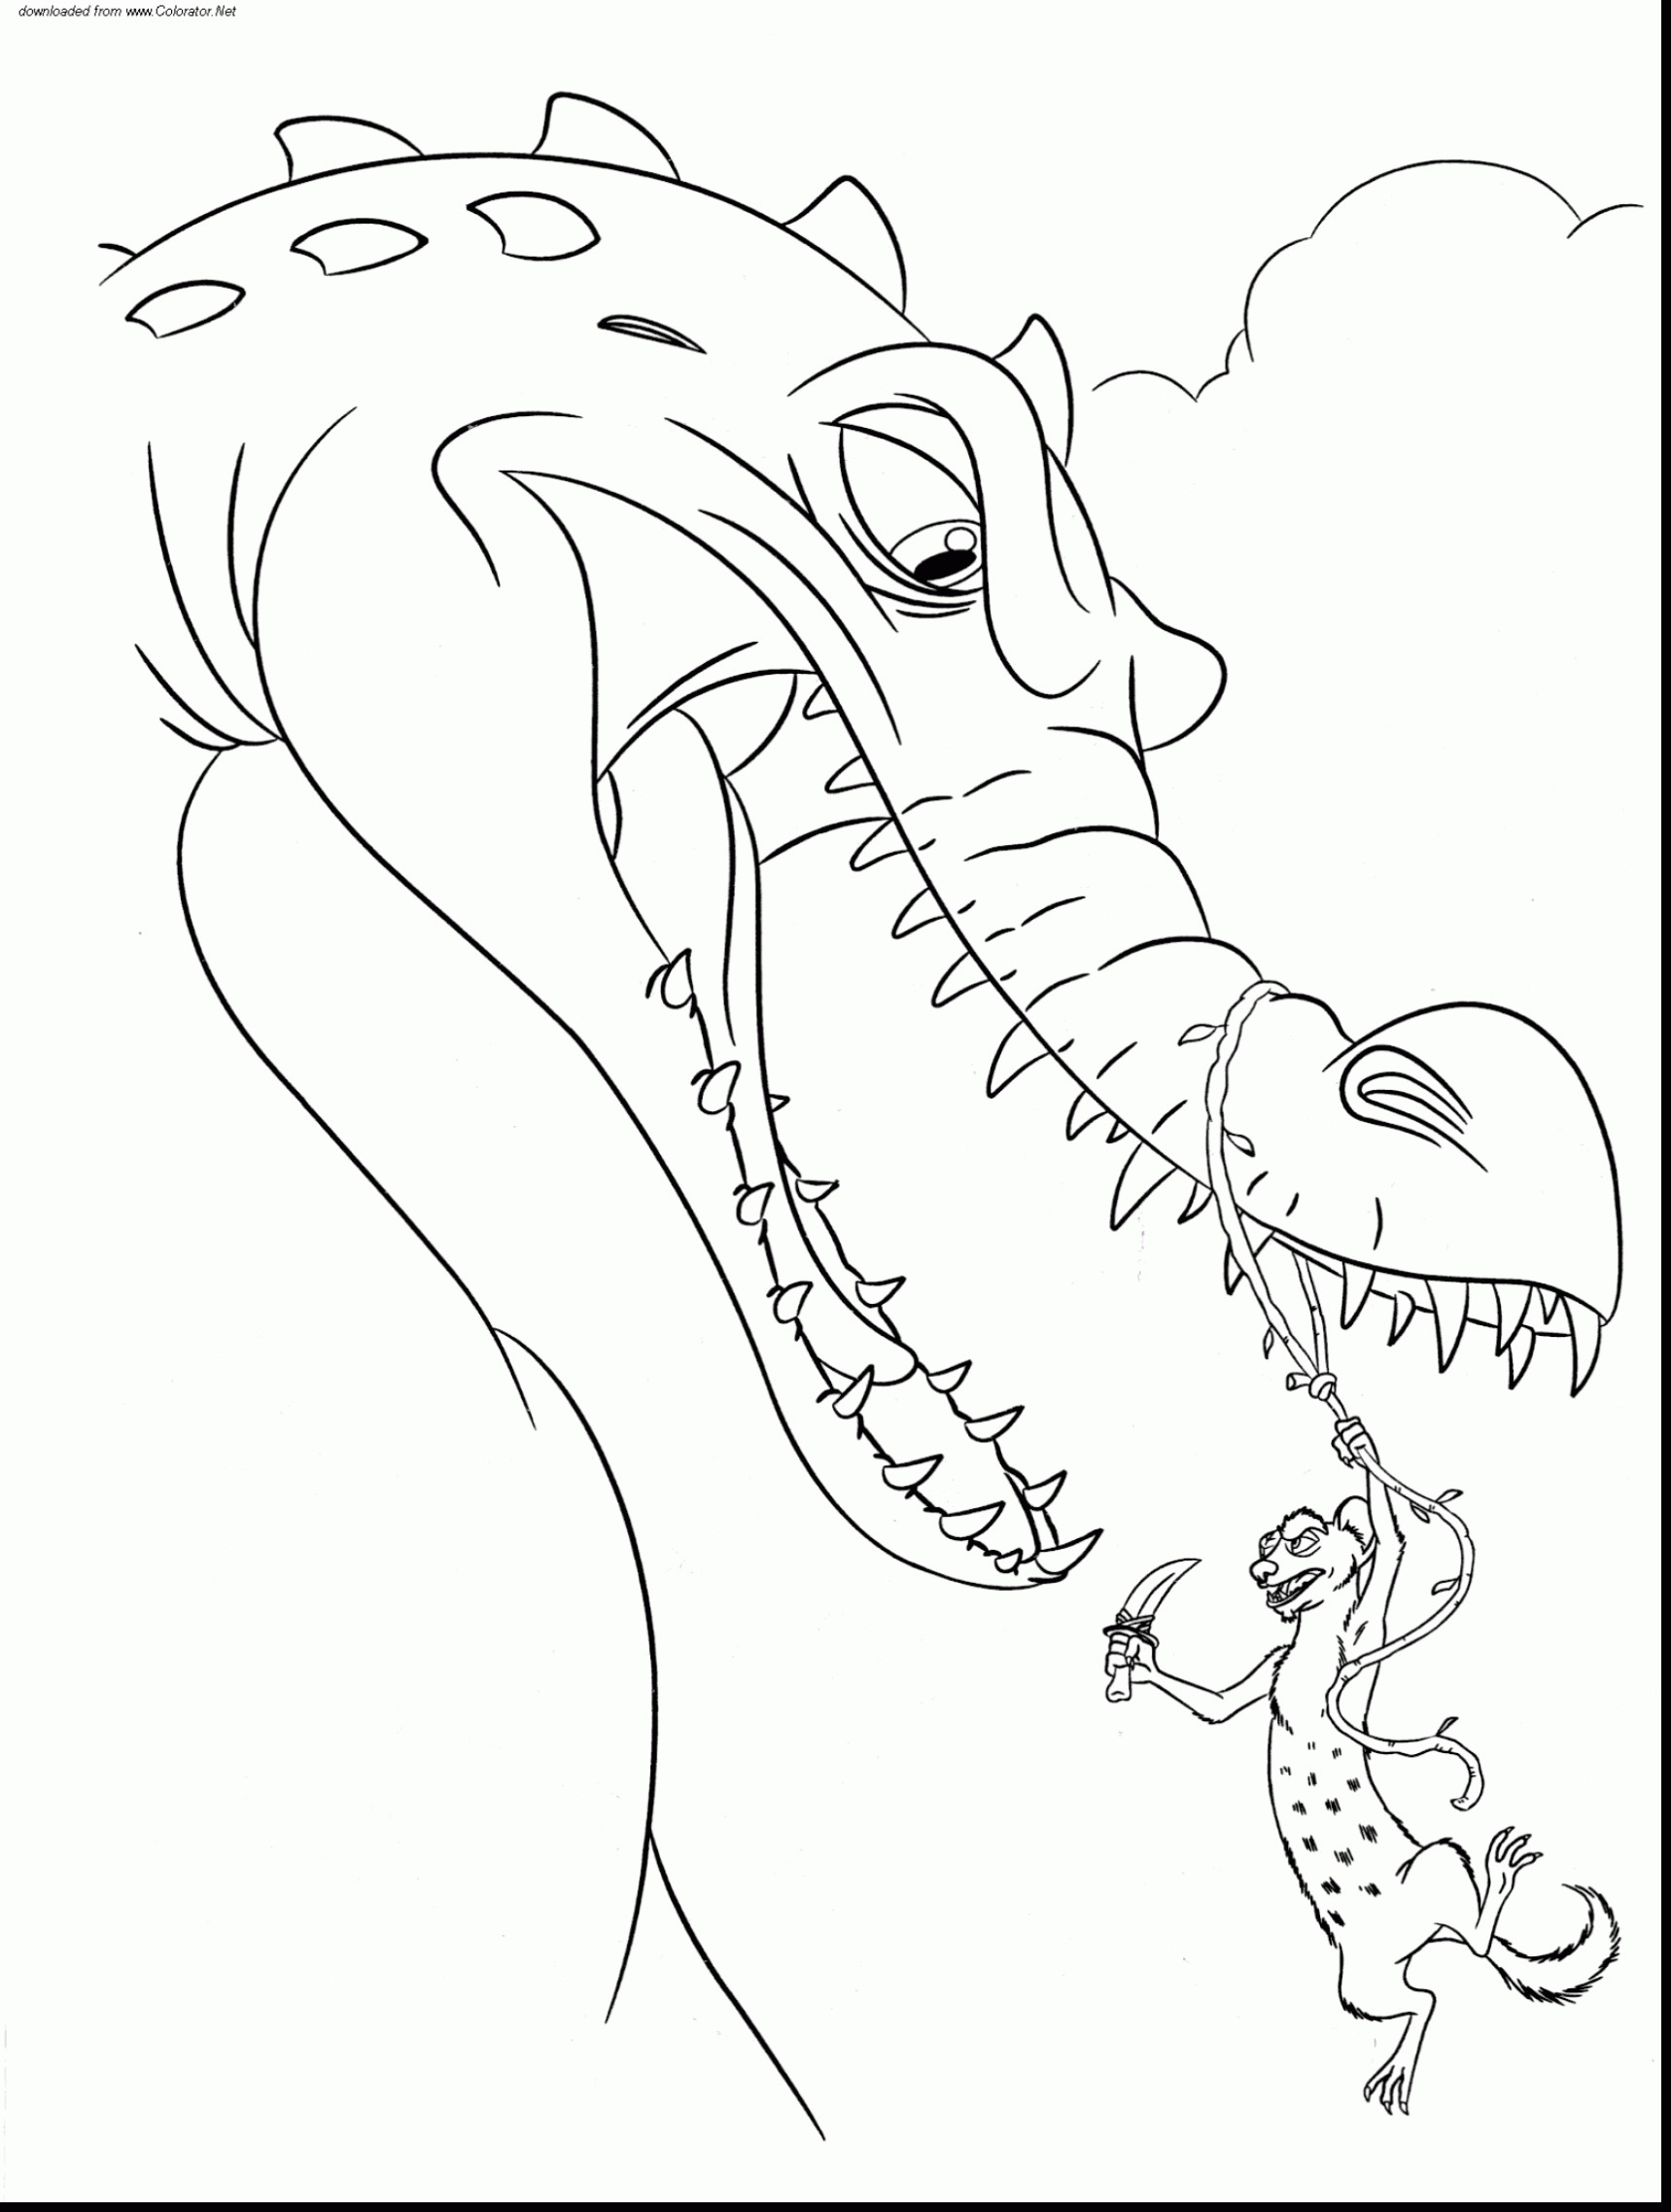 Rudy Ice Age Coloring Sheet Gulfmik cecede630c44